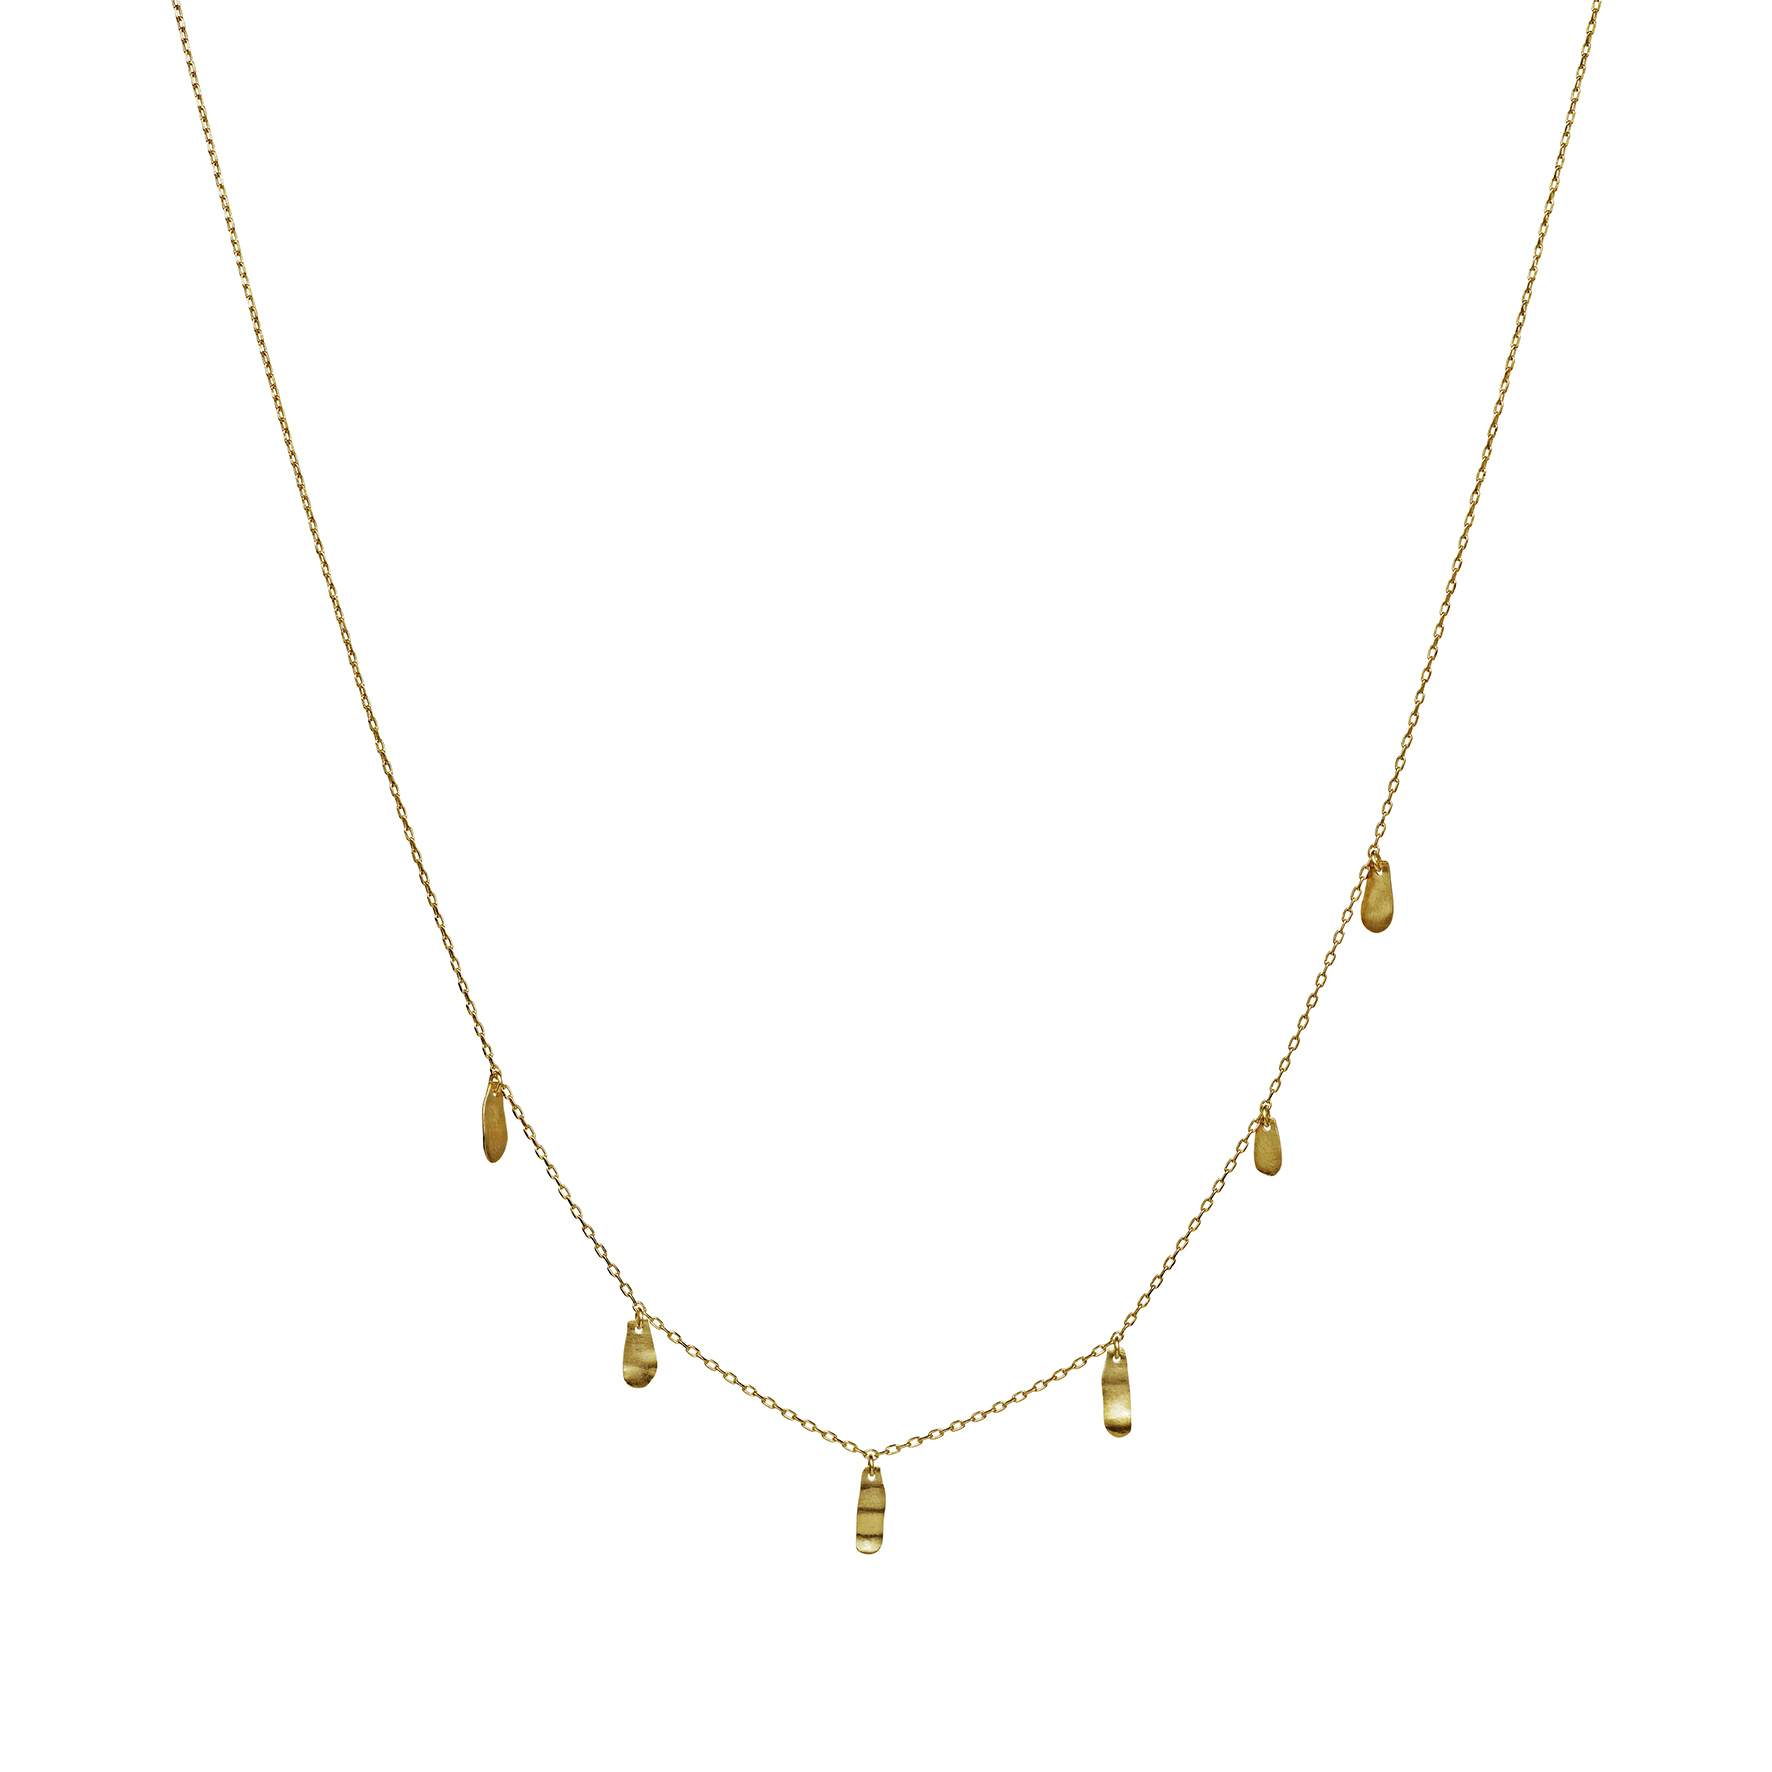 Columbine Necklace from Maanesten in Goldplated-Silver Sterling 925